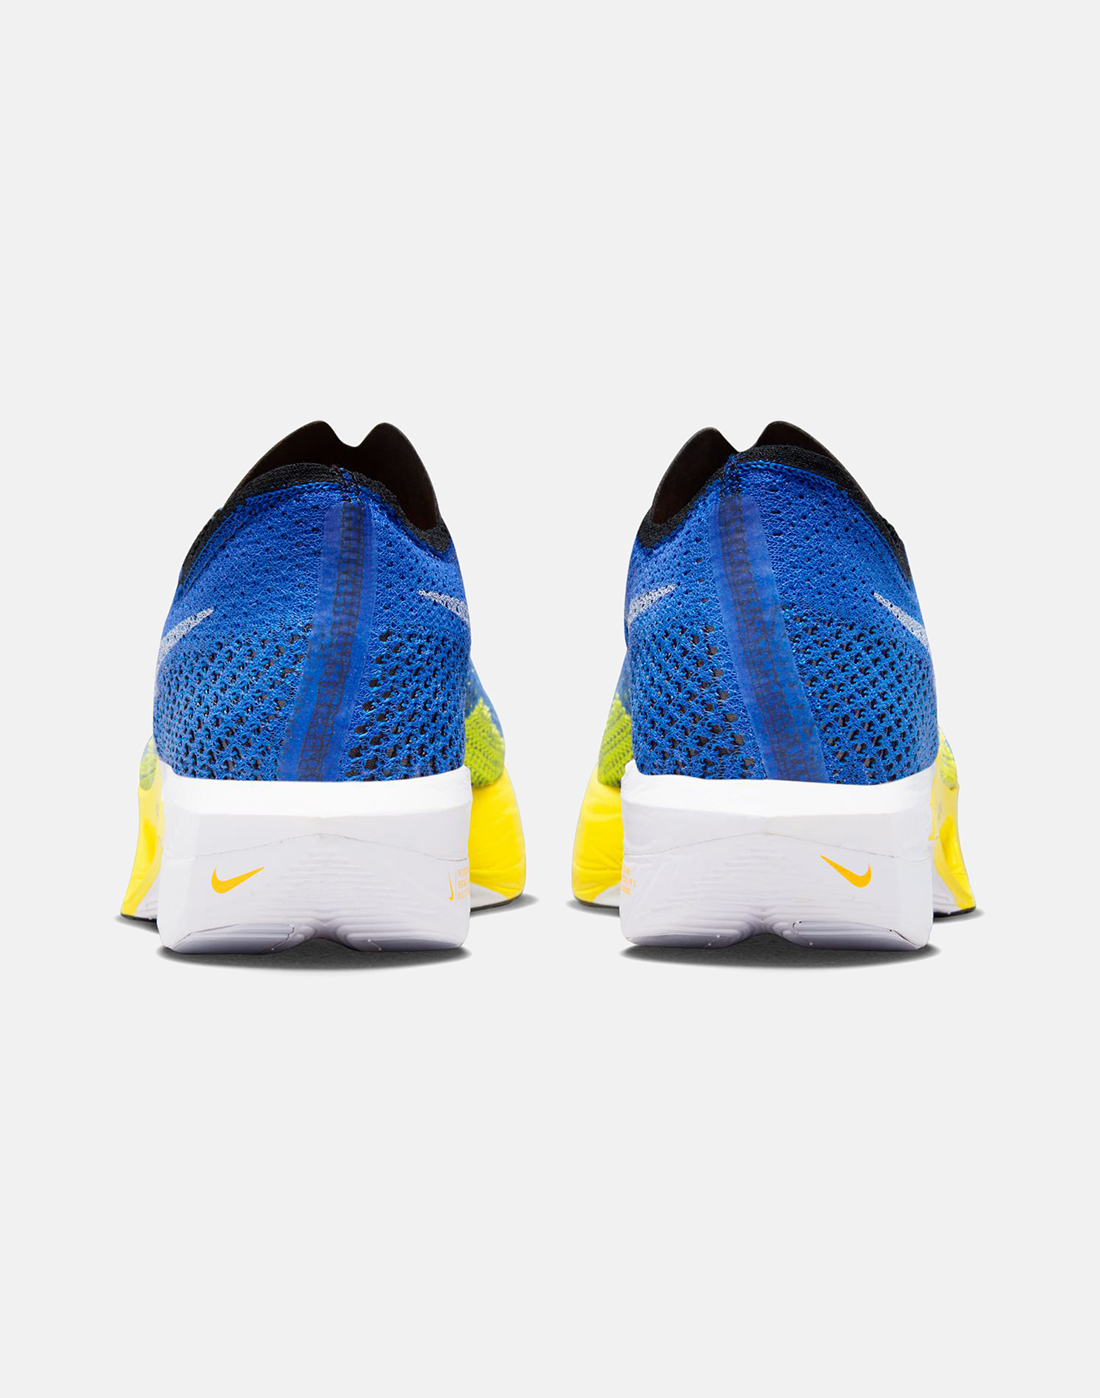 Nike Mens ZoomX Vaporfly Next % 3 - Blue | Life Style Sports IE